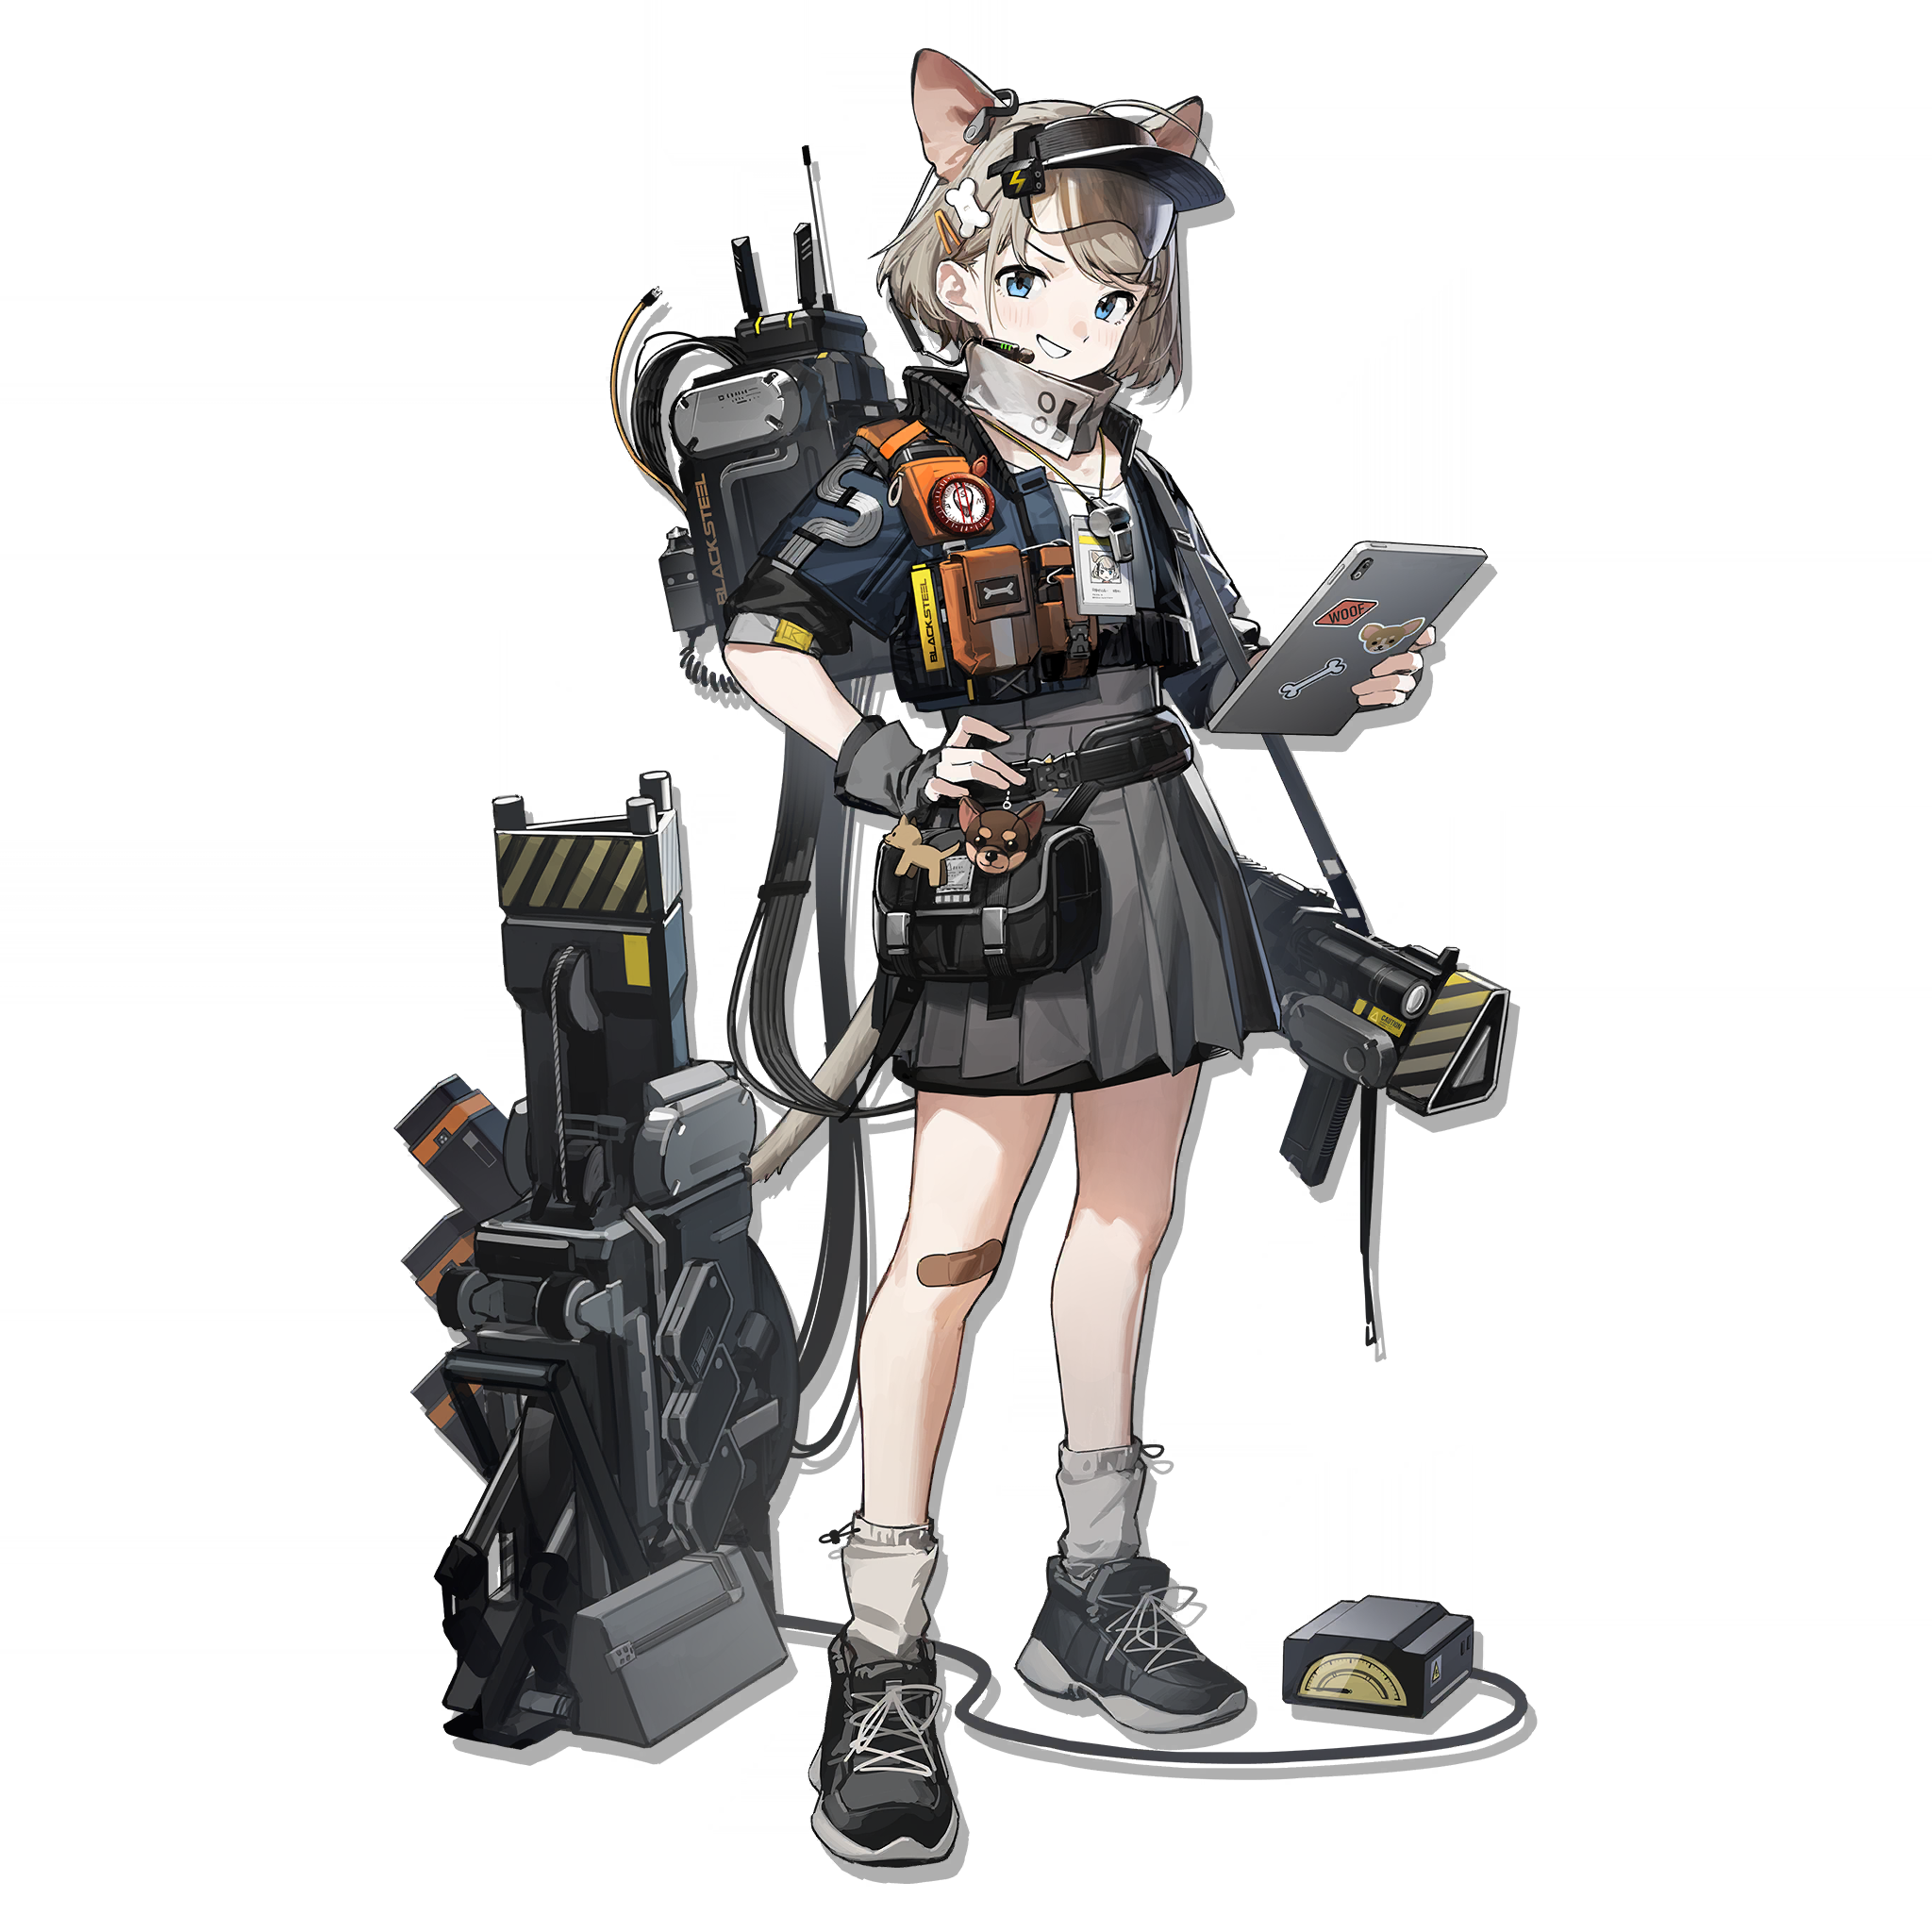 Pack 杏仁 skin 0 0.png